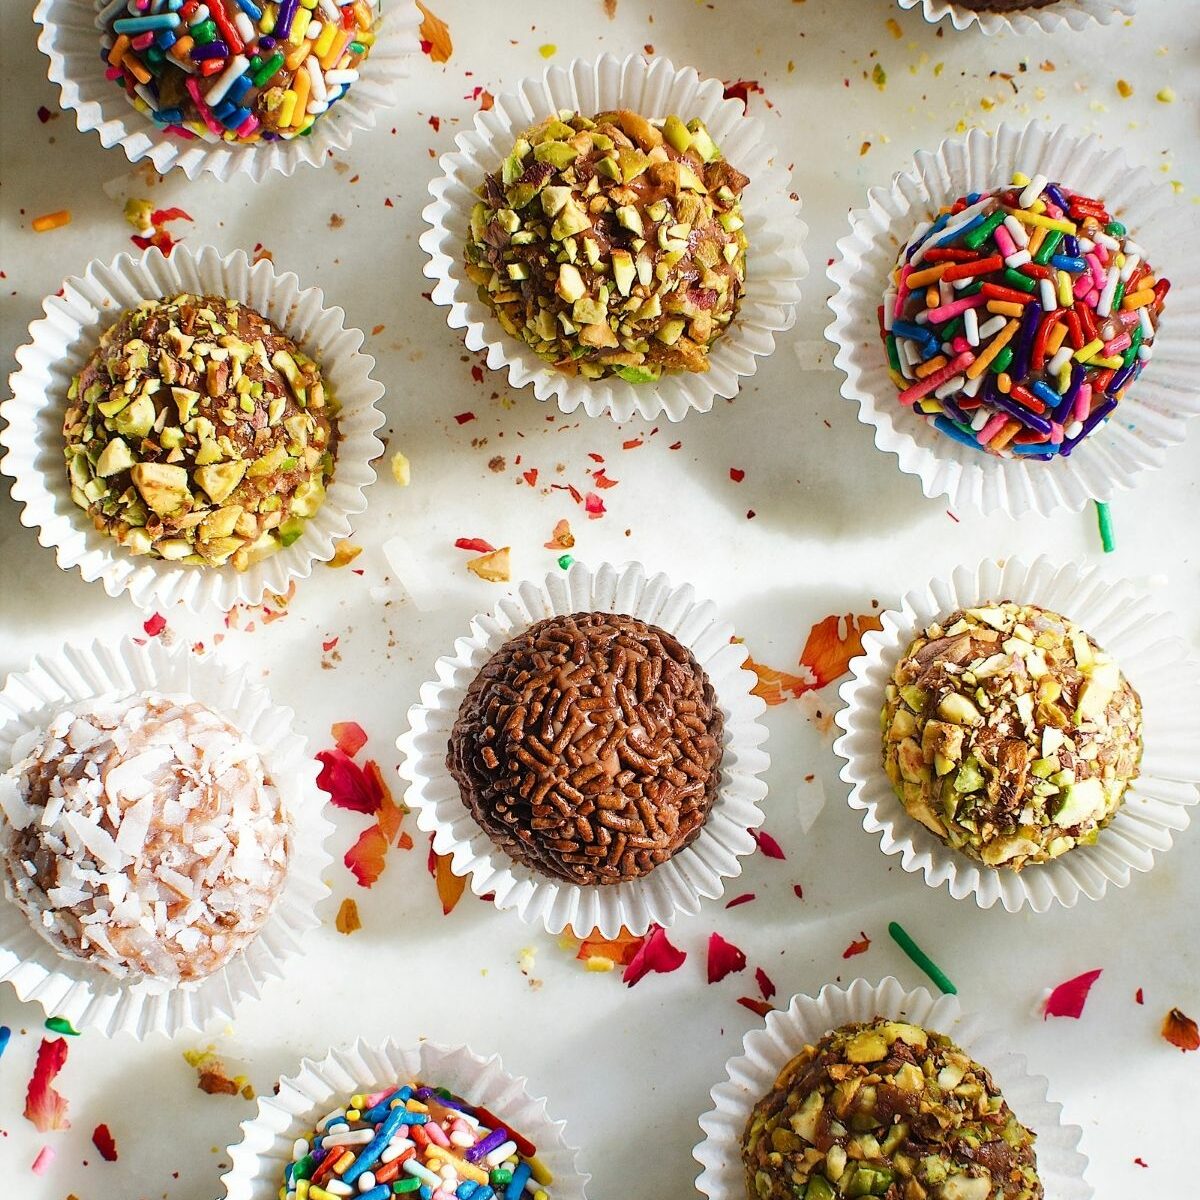 brigadeiro balls, coated with chocolate sprinkles, chopped nuts, assorted sprinkles, and coconut flakes, in a mini cupcake liners.